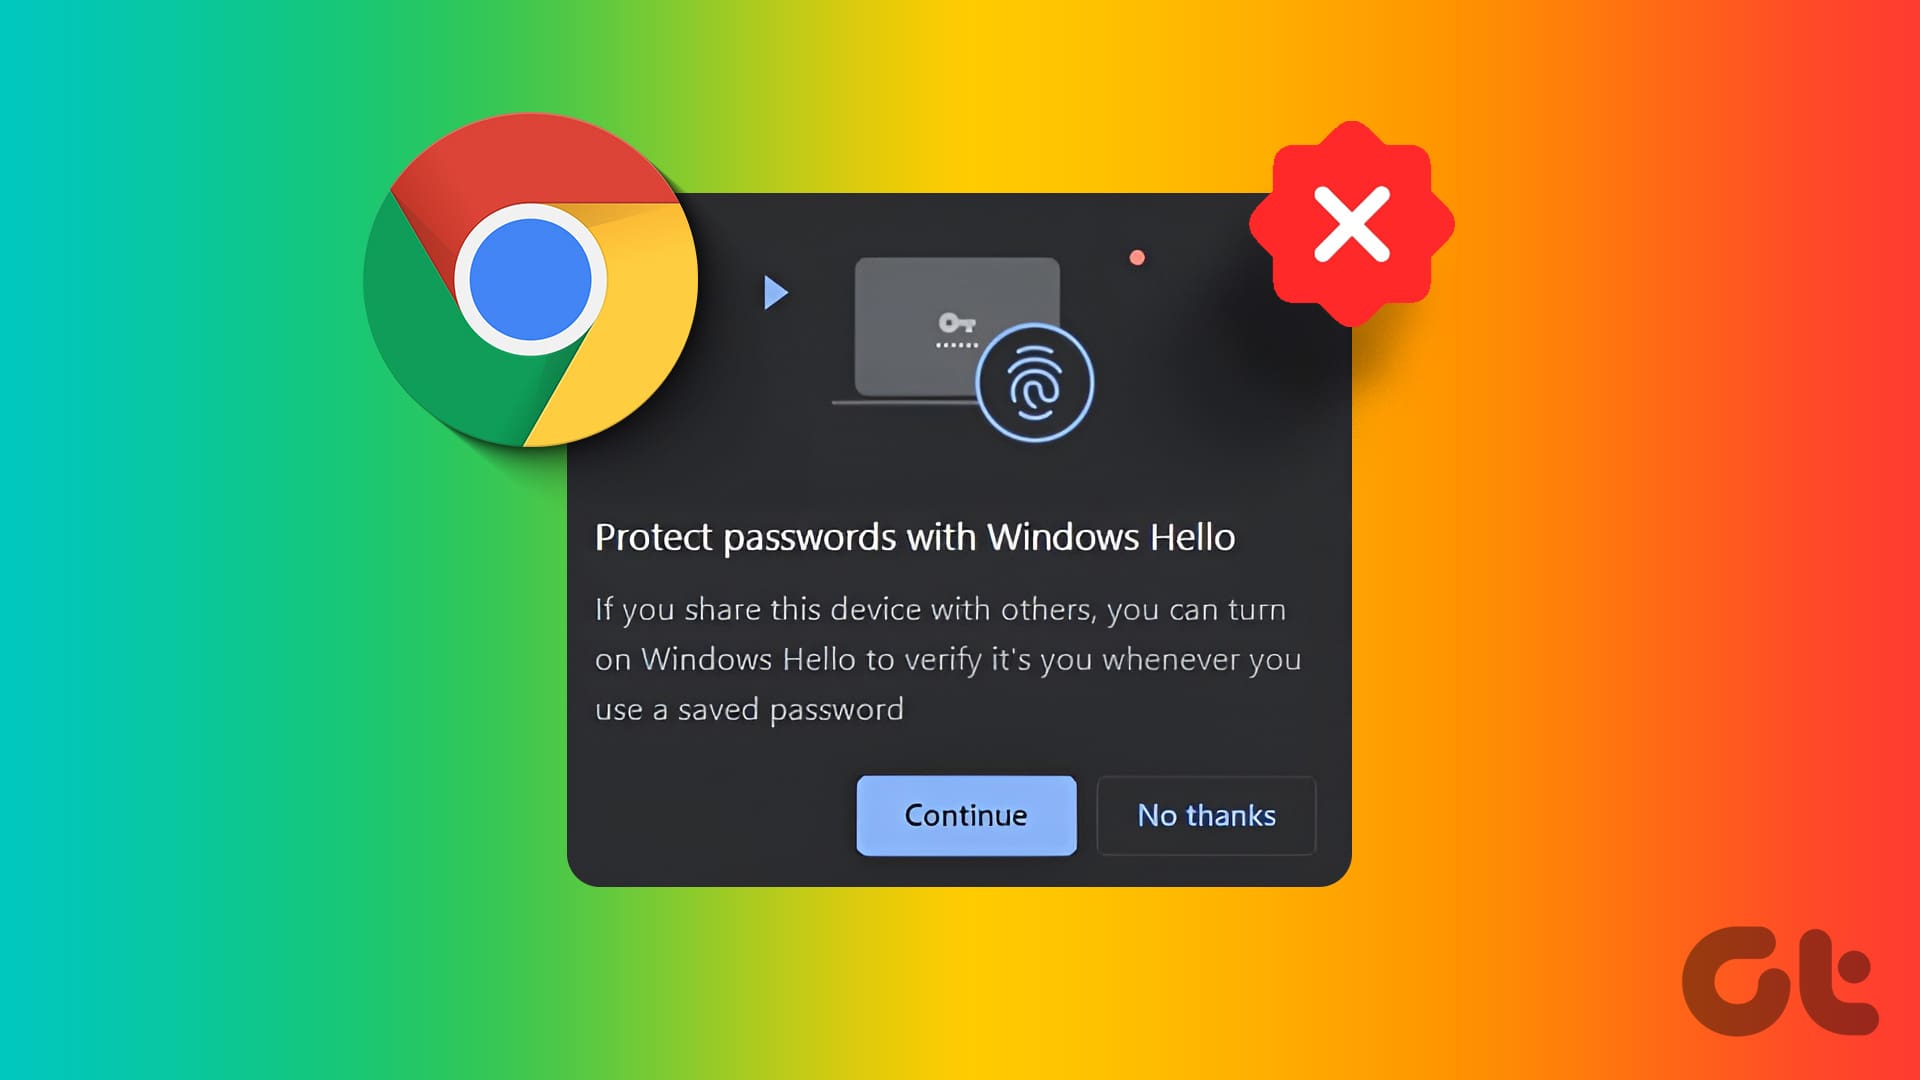 Enable Windows Hello for Payments in Google Chrome